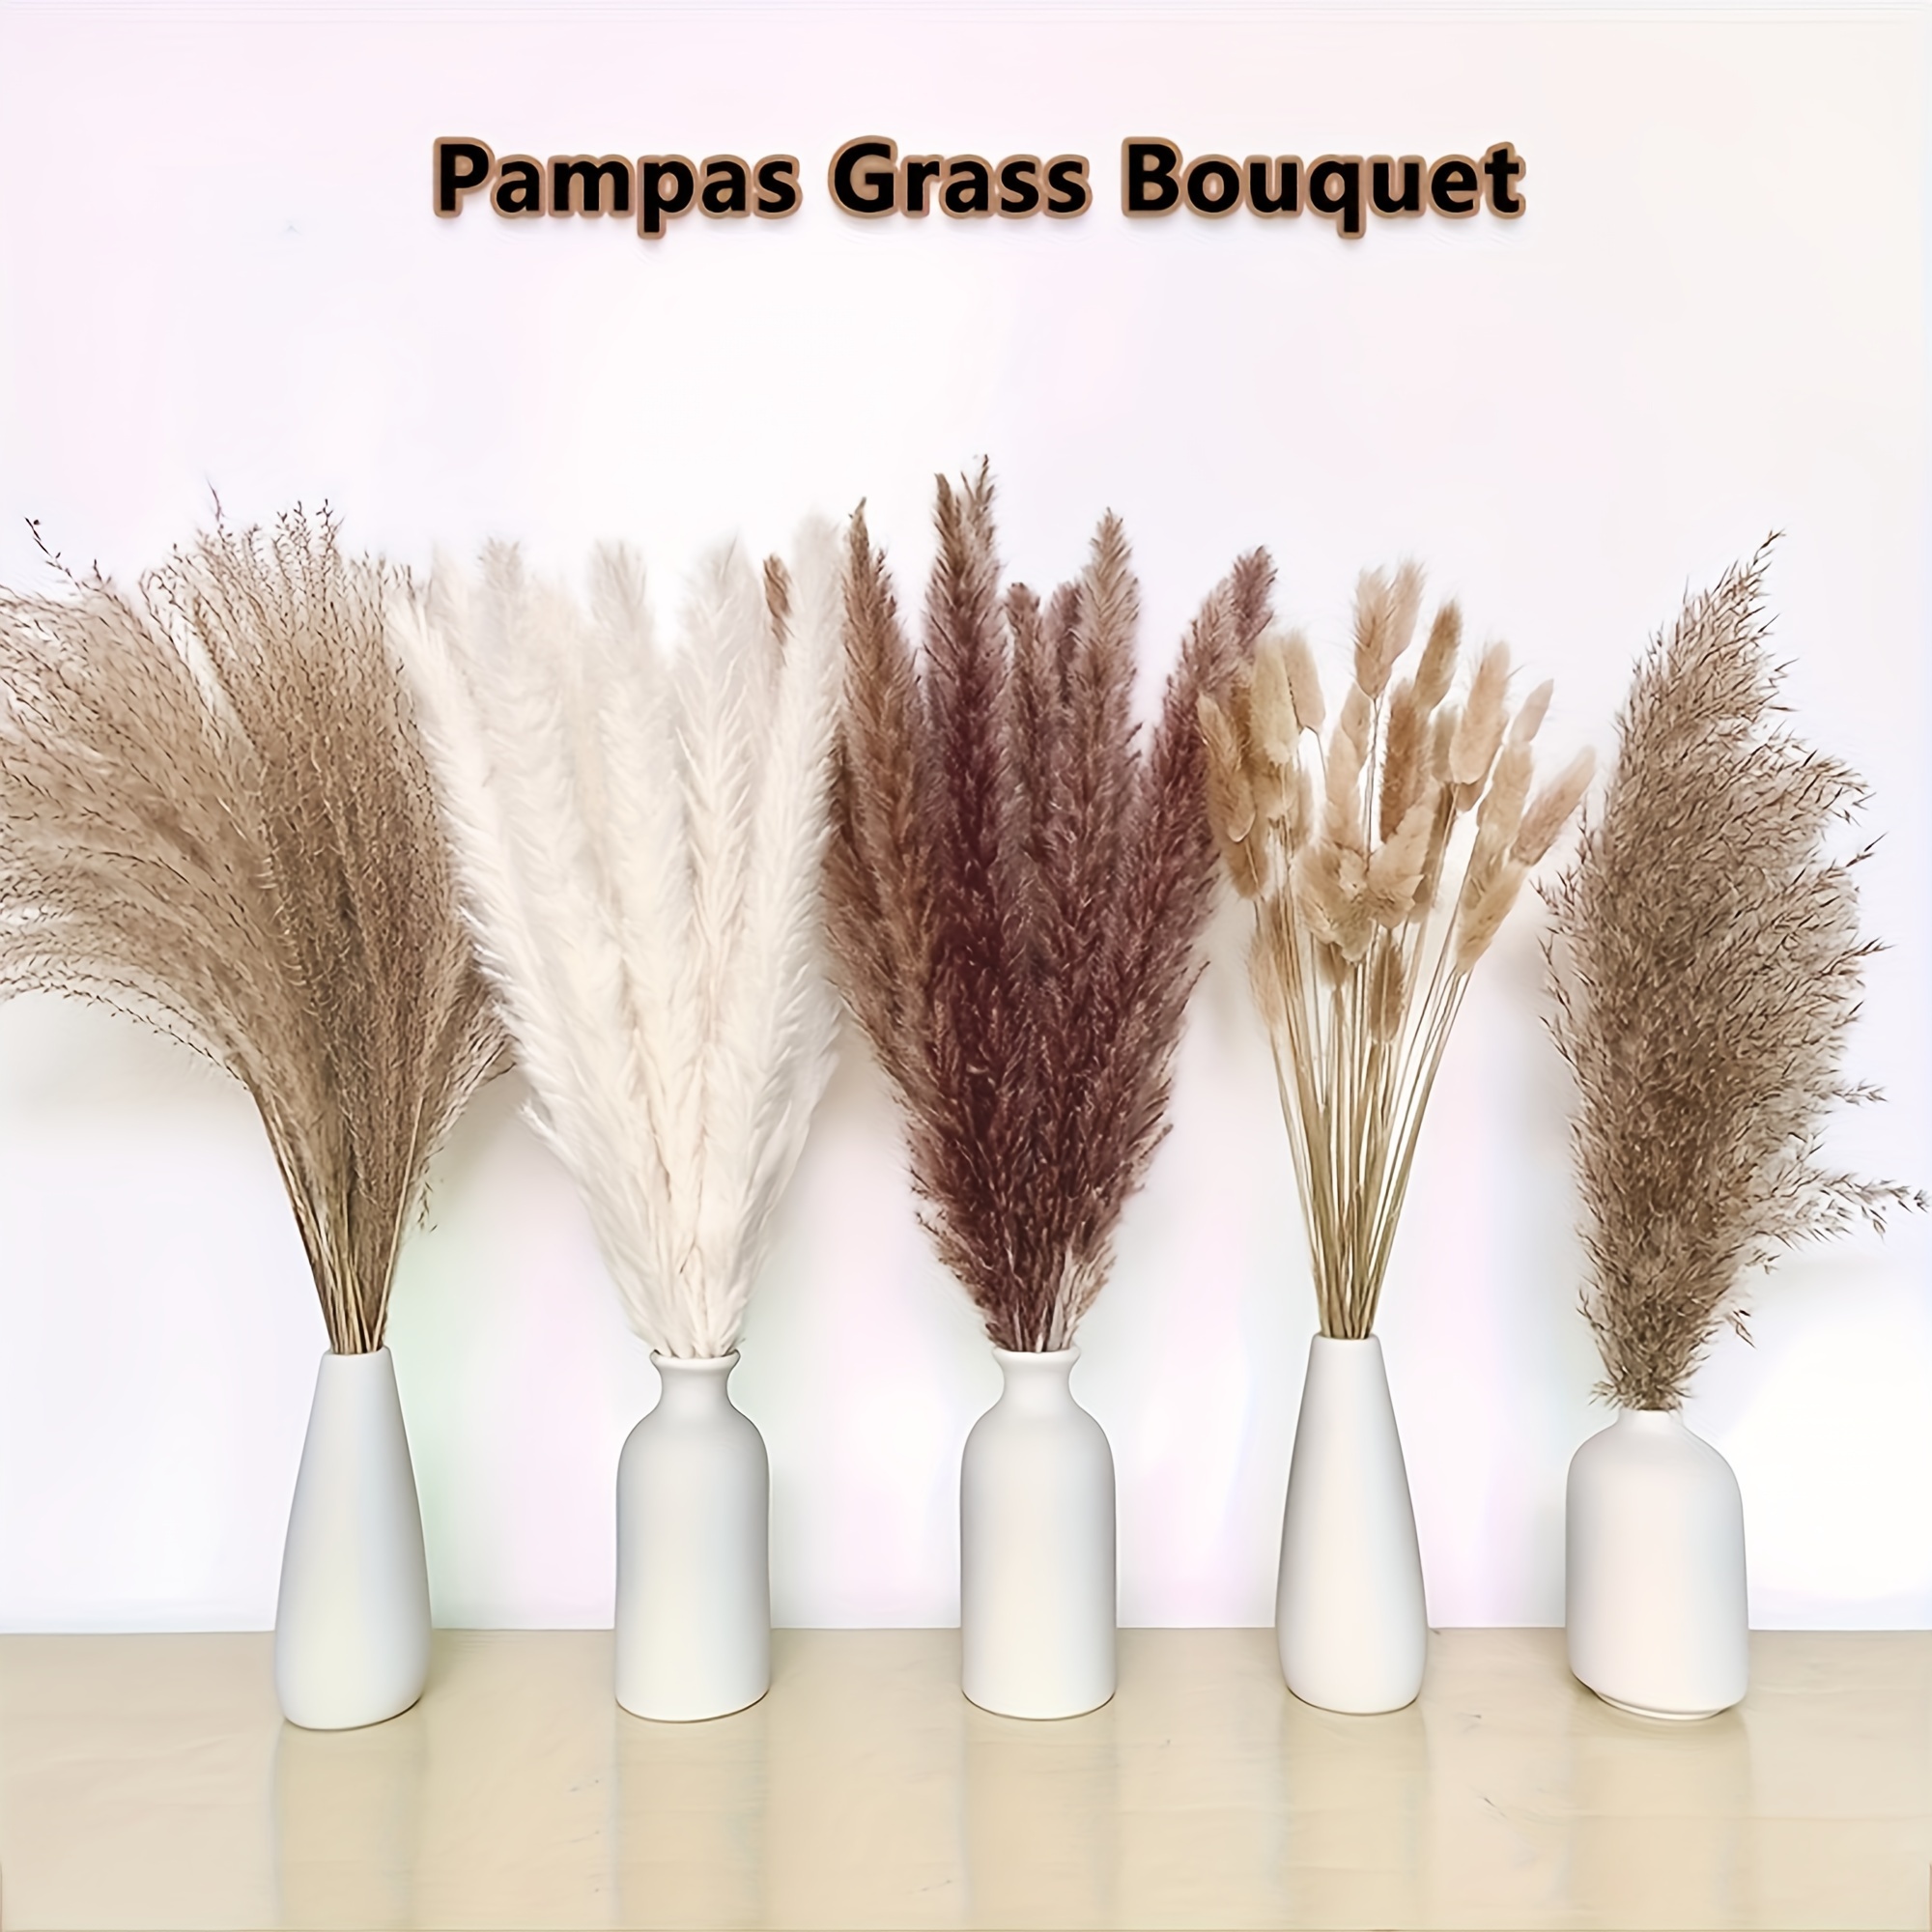 Gold Grass, Decorative Plumes, Natural Dried Plumes, Pampas Grass, Pampas  Grass Decor, Fall Decorations Indoor, Gold Grass Decor -  Norway